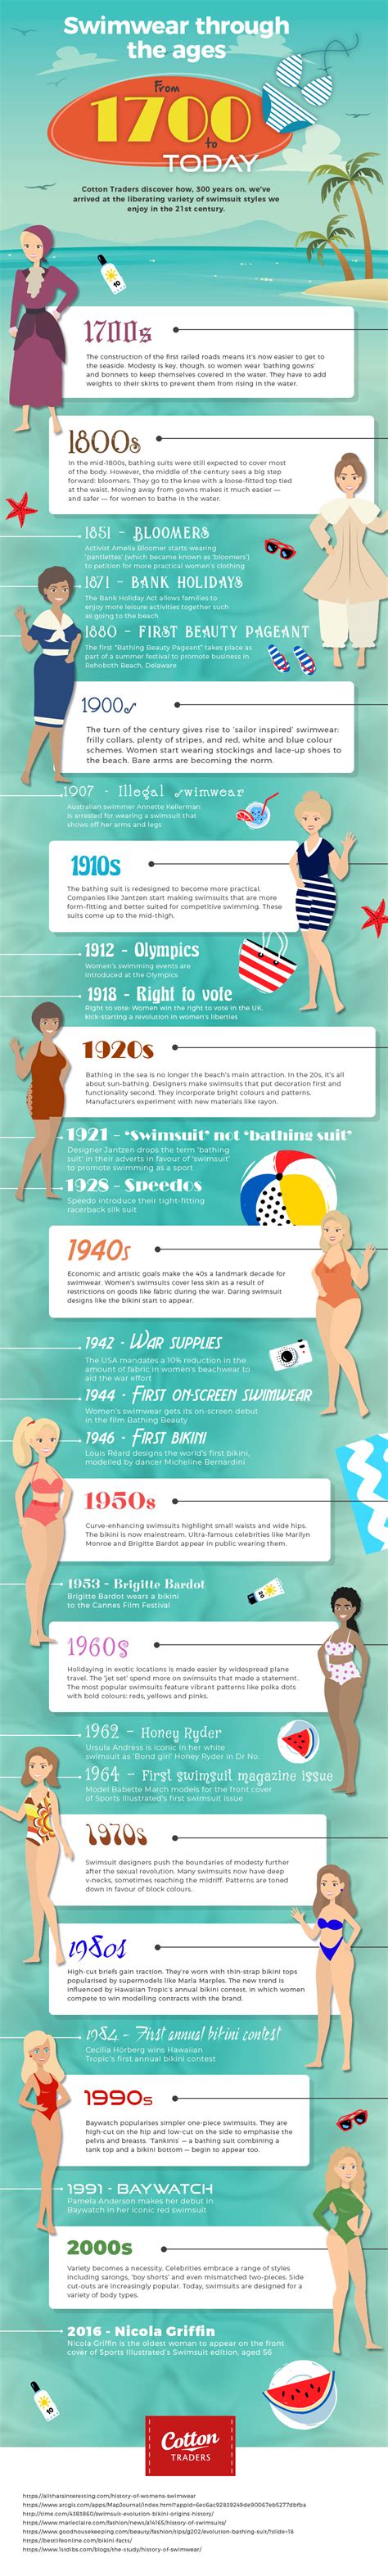 From 1700 To Today Swimwear Through The Ages Infographic